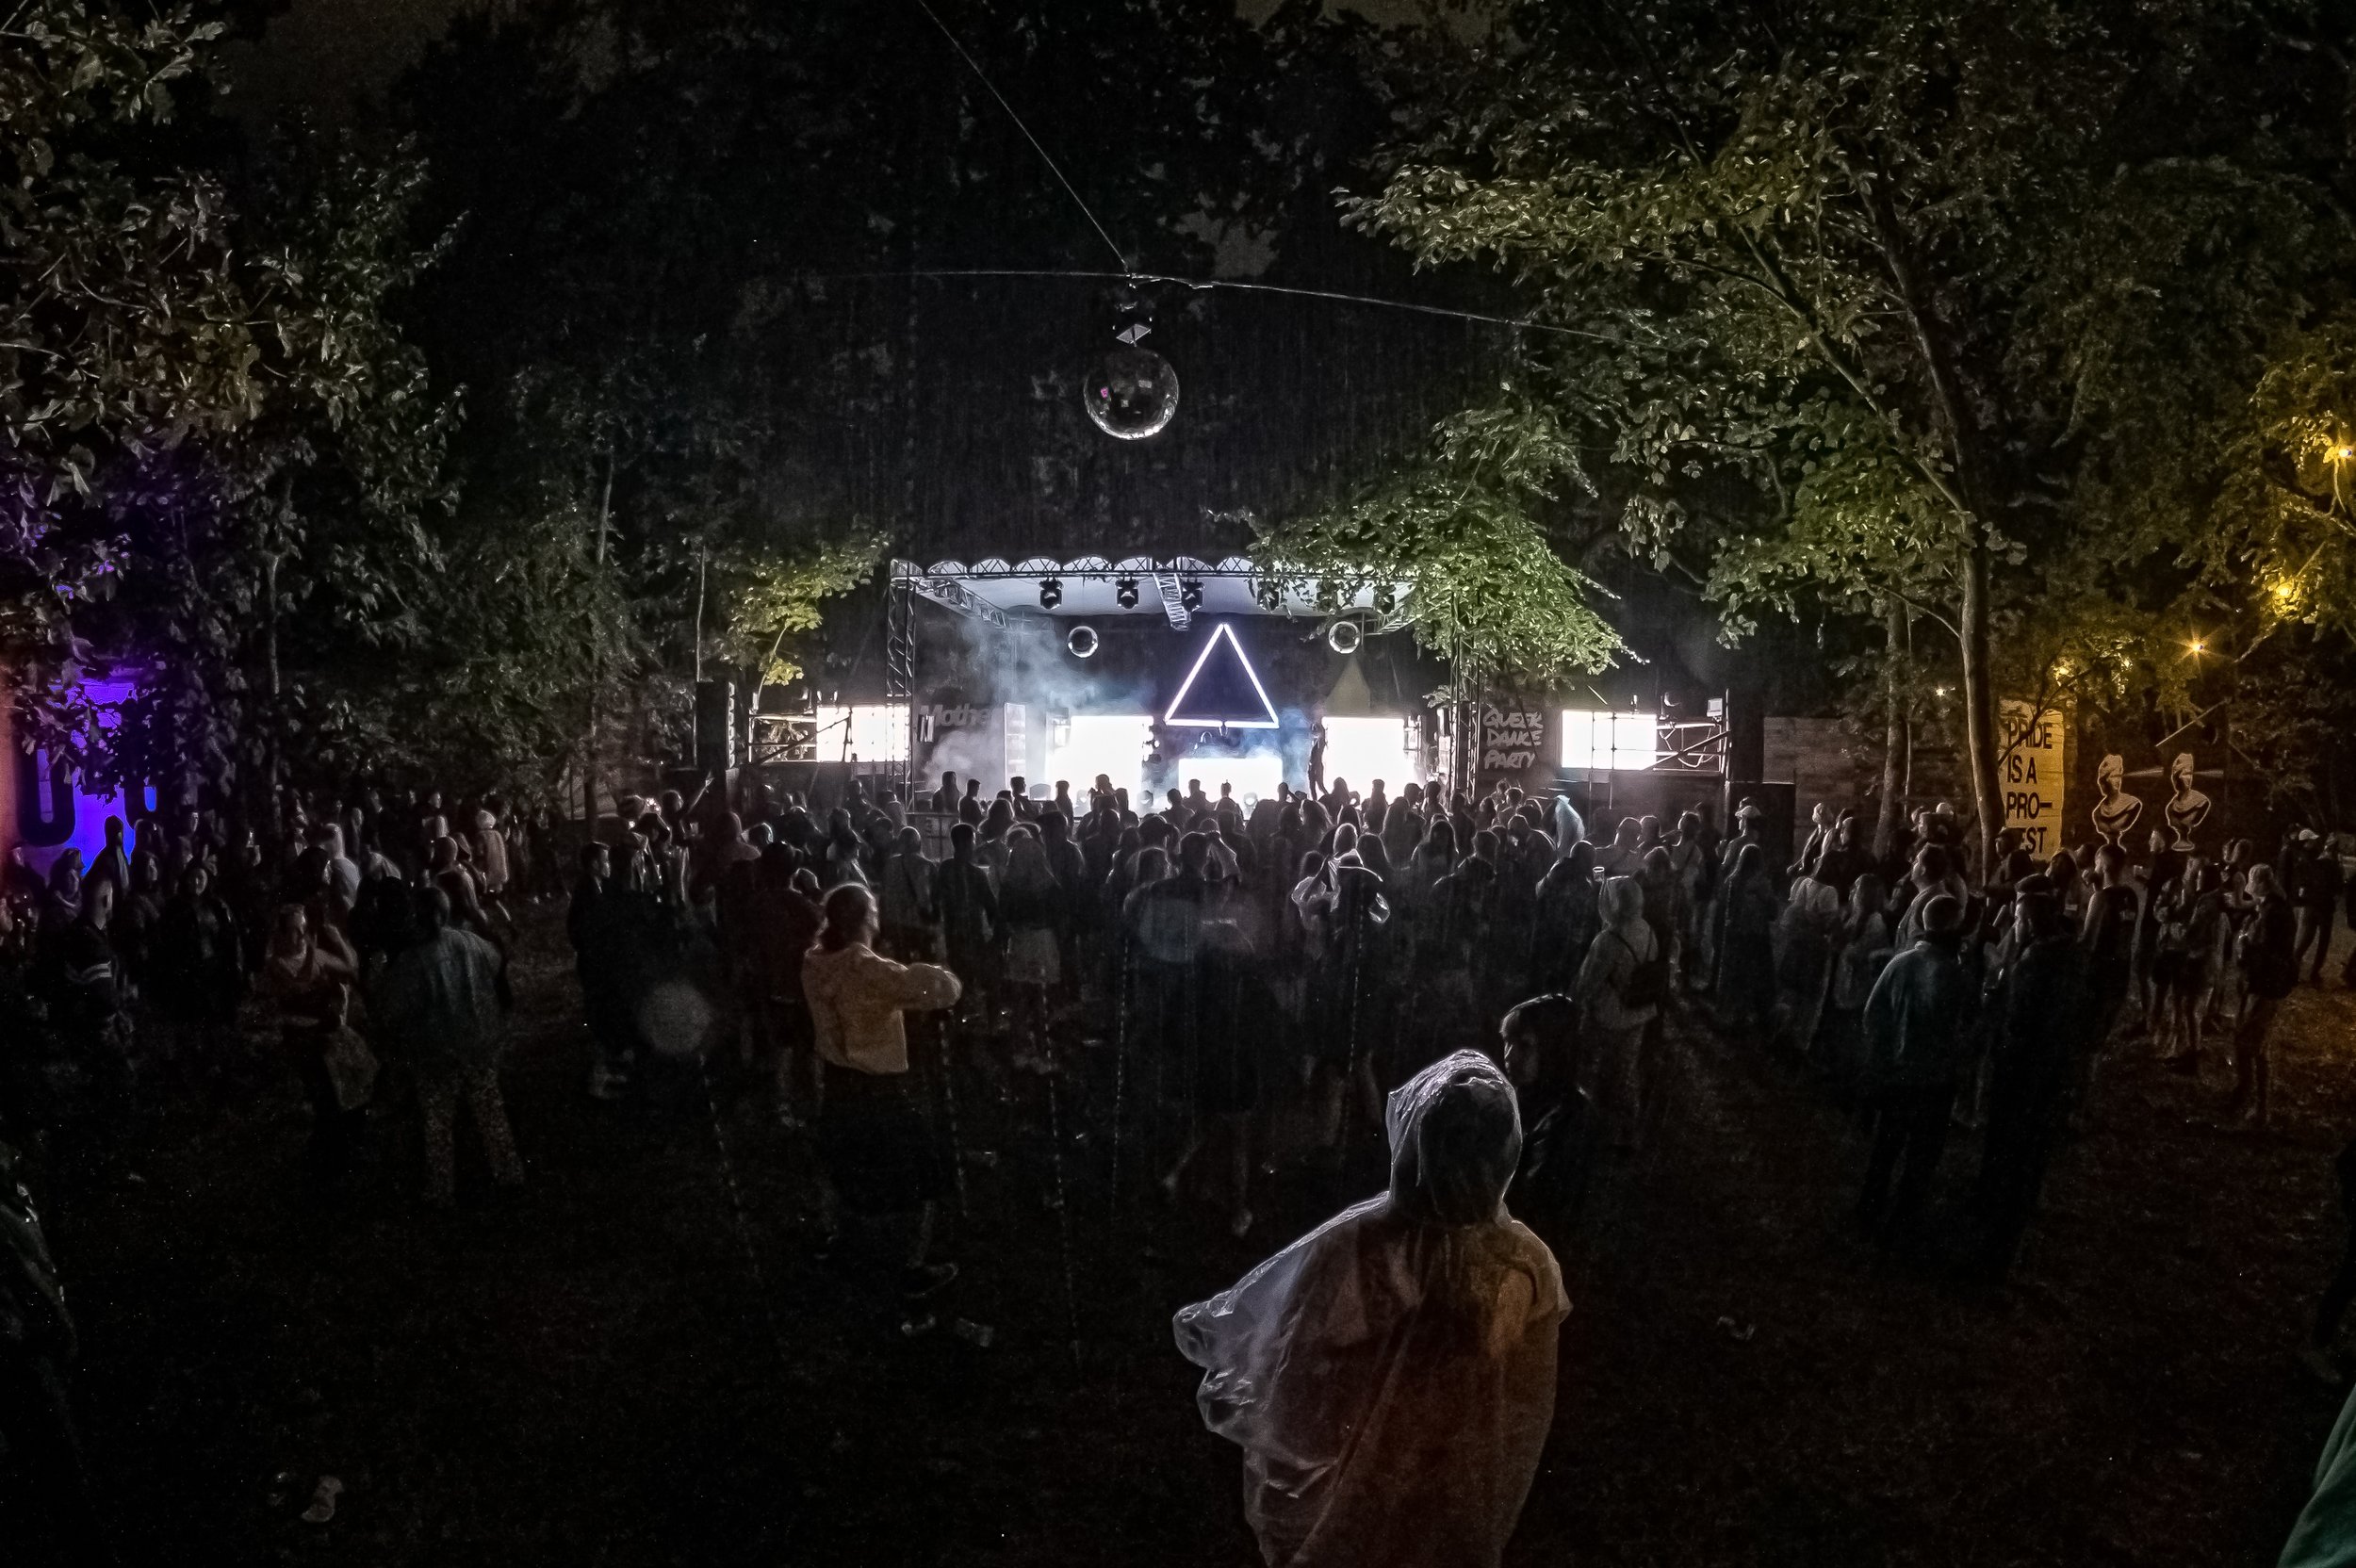 Mother After Dark - Queer Dance Party in The Woods at Electric Picnic